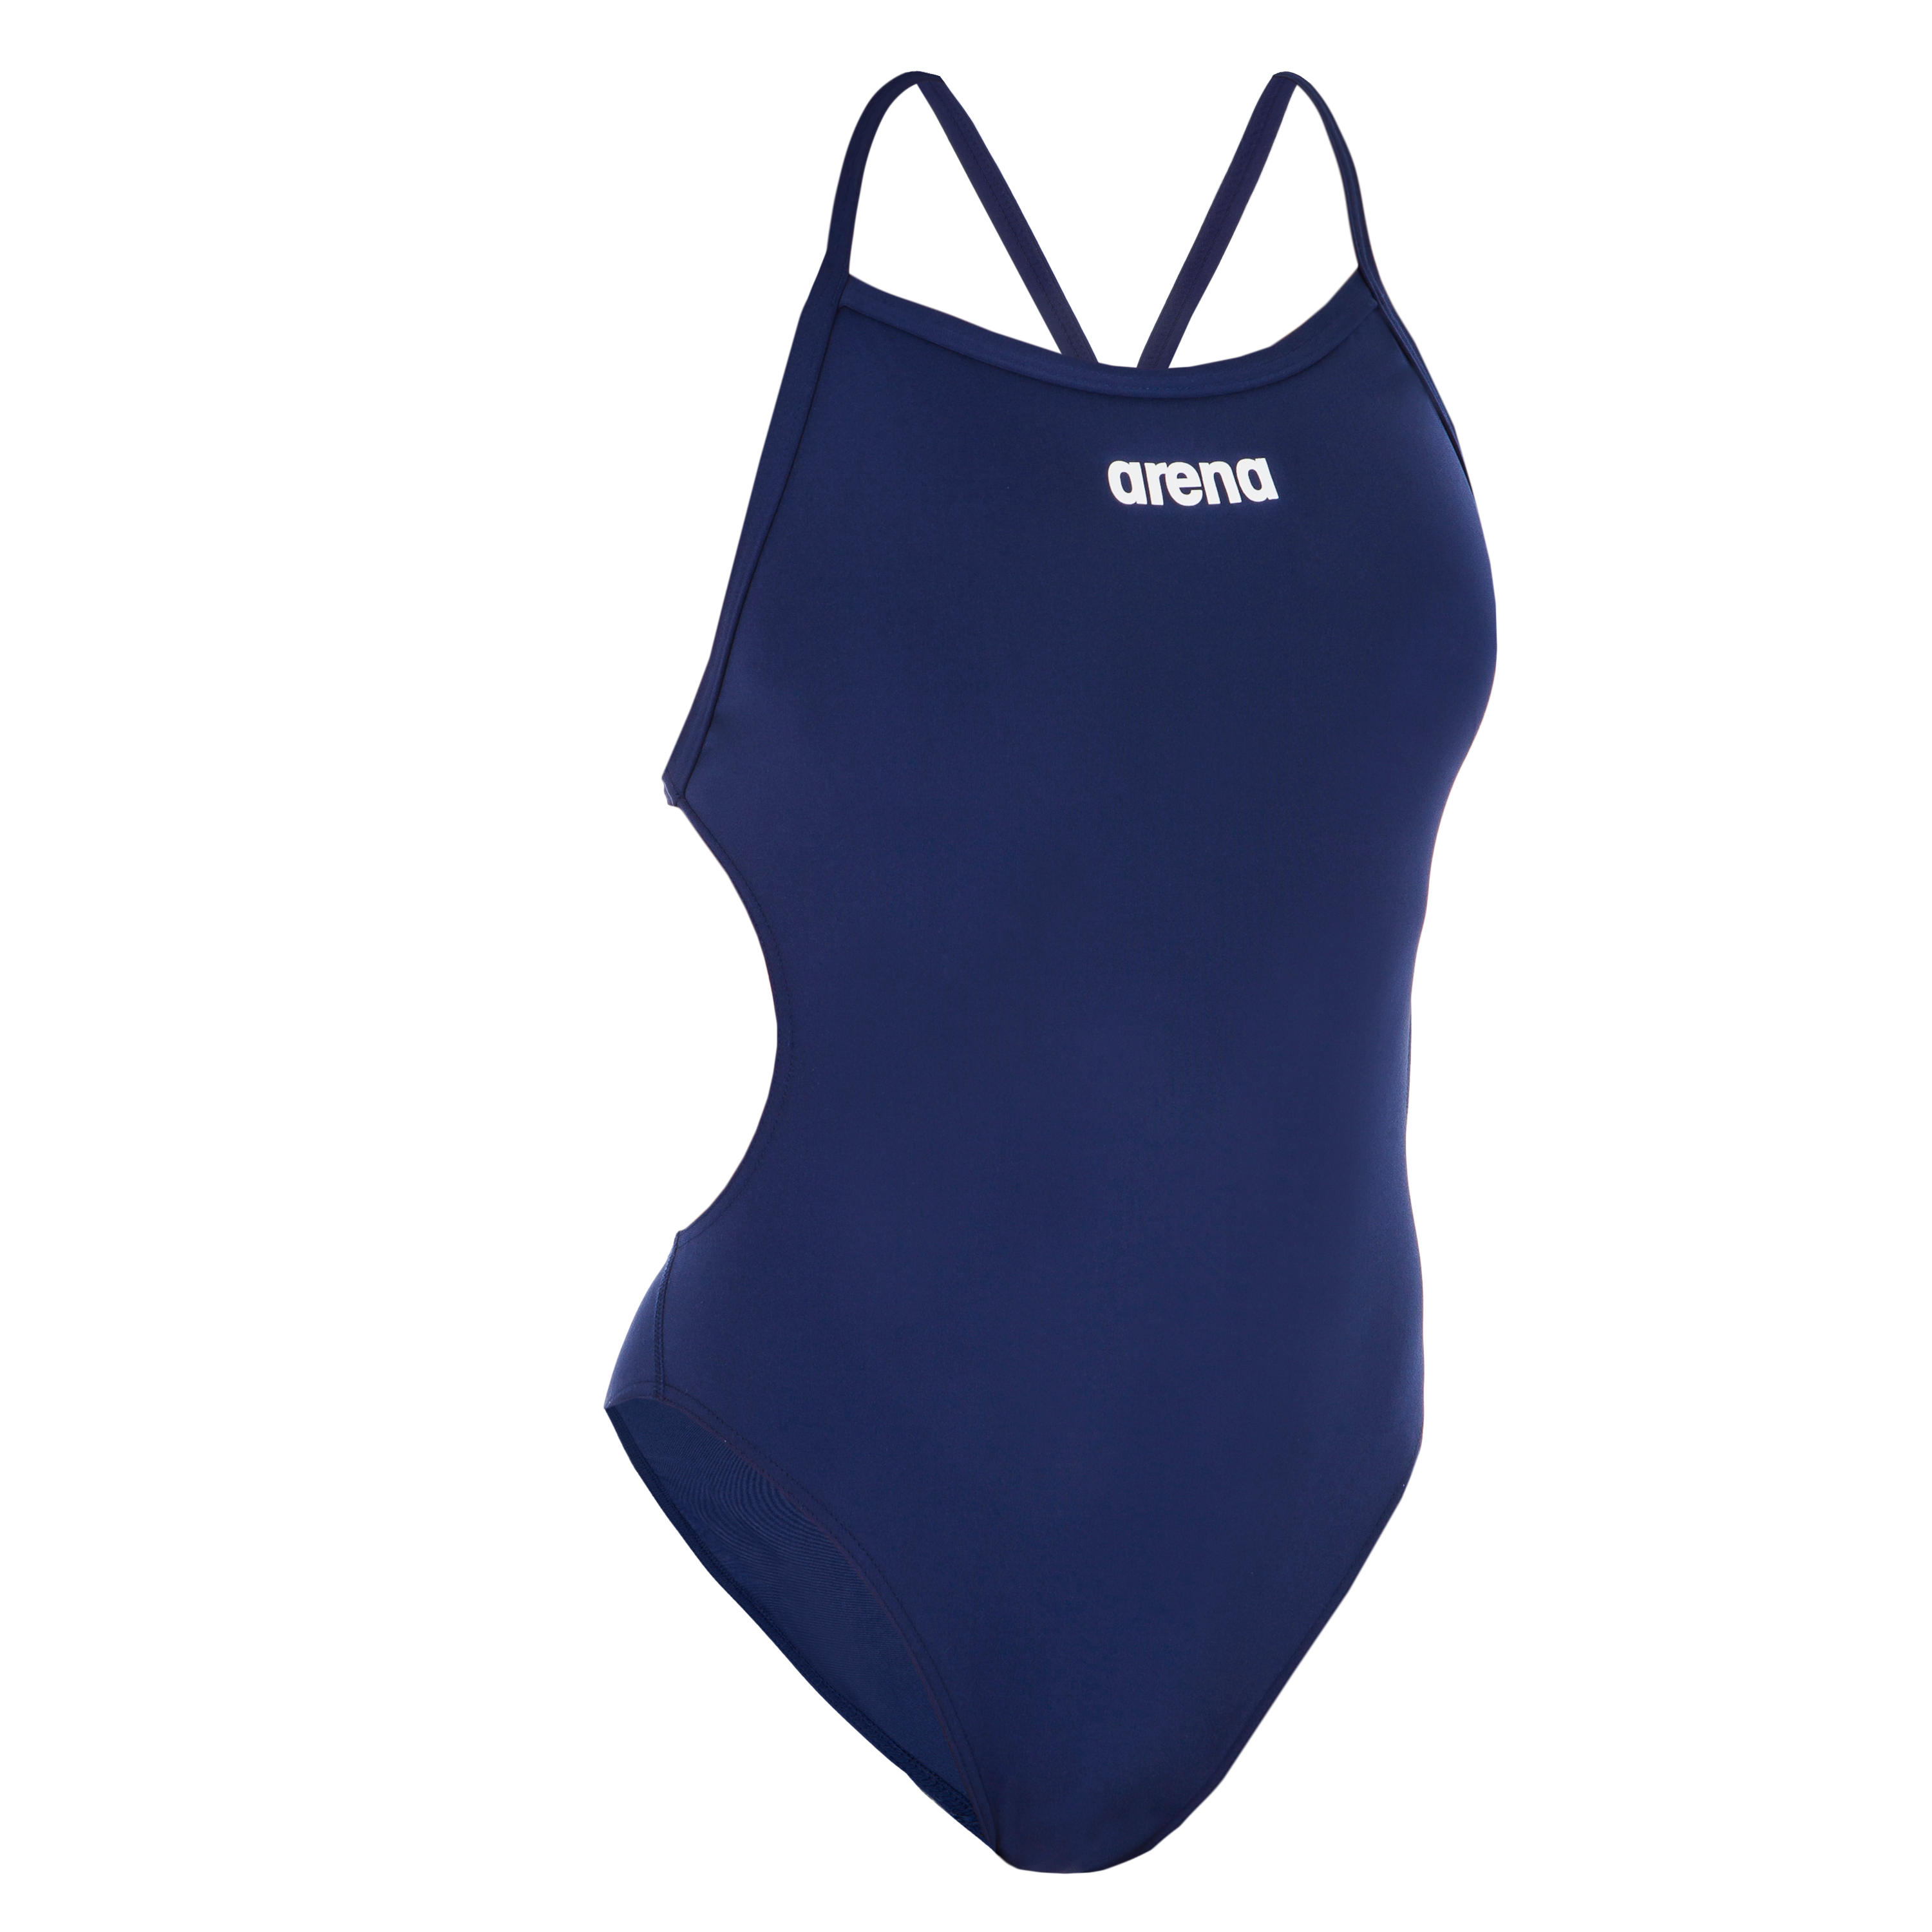 WOMEN’S ONE-PIECE SWIMSUIT ARENA SOLID TECH - NAVY 4/4